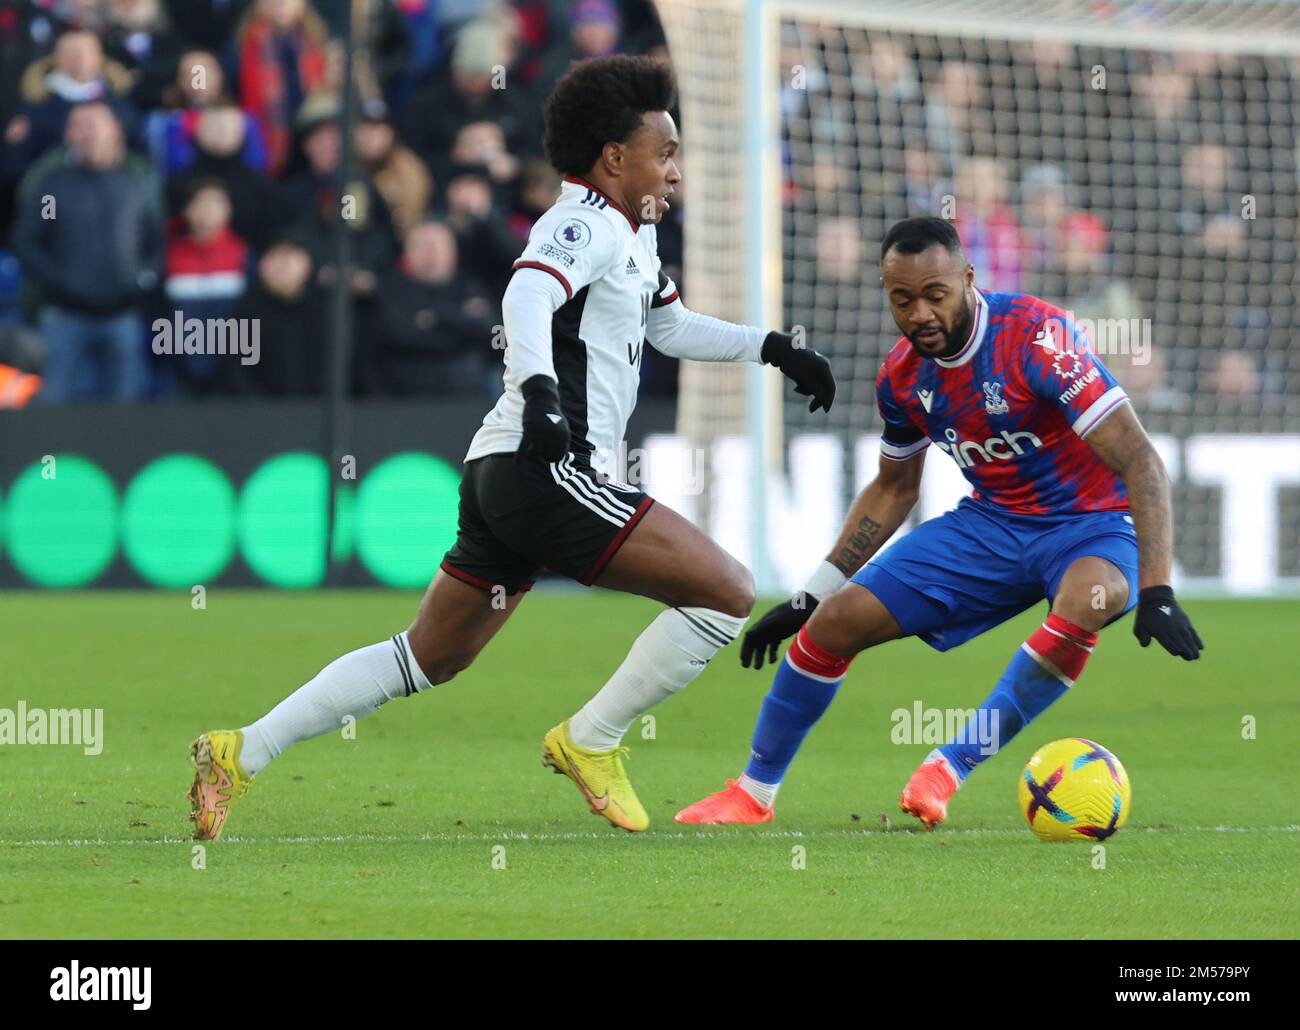 London ENGLAND - December 26: Fulham's Willian Borges Da Silva during English Premier League soccer match between Crystal Palace against Fulham at Sel Stock Photo